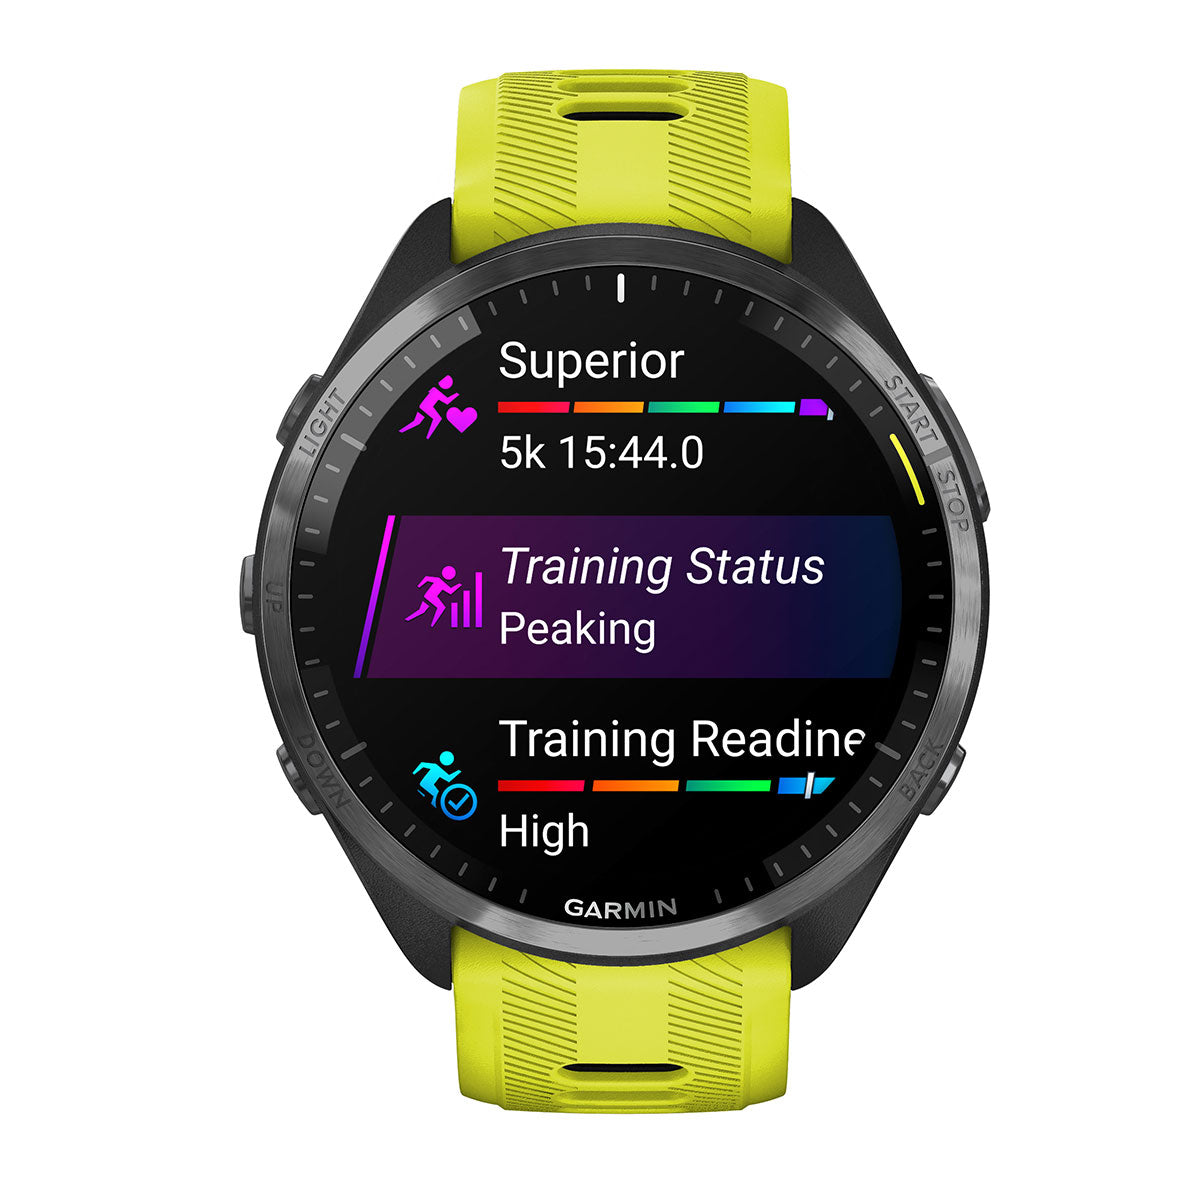 Garmin Forerunner 965 (Amp Yellow/Black) Premium Running & Triathlon GPS Smartwatch | Bundle with PlayBetter Screen Protectors & Portable Charger - image 3 of 7